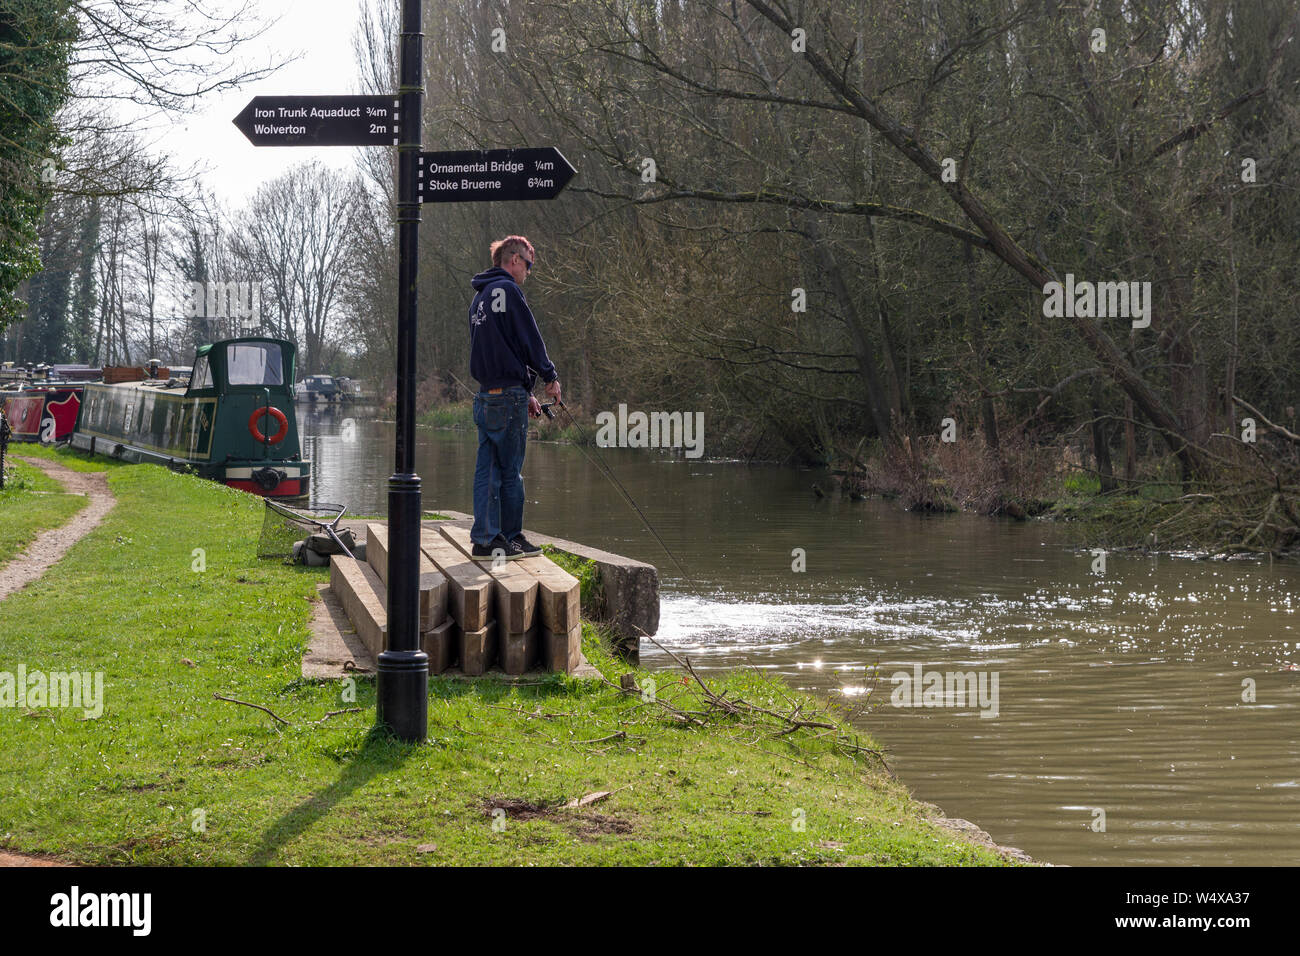 Man standing up and fishing at the junction of the Grand Union canal and Buckingham Arm, Cosgrove, UK Stock Photo